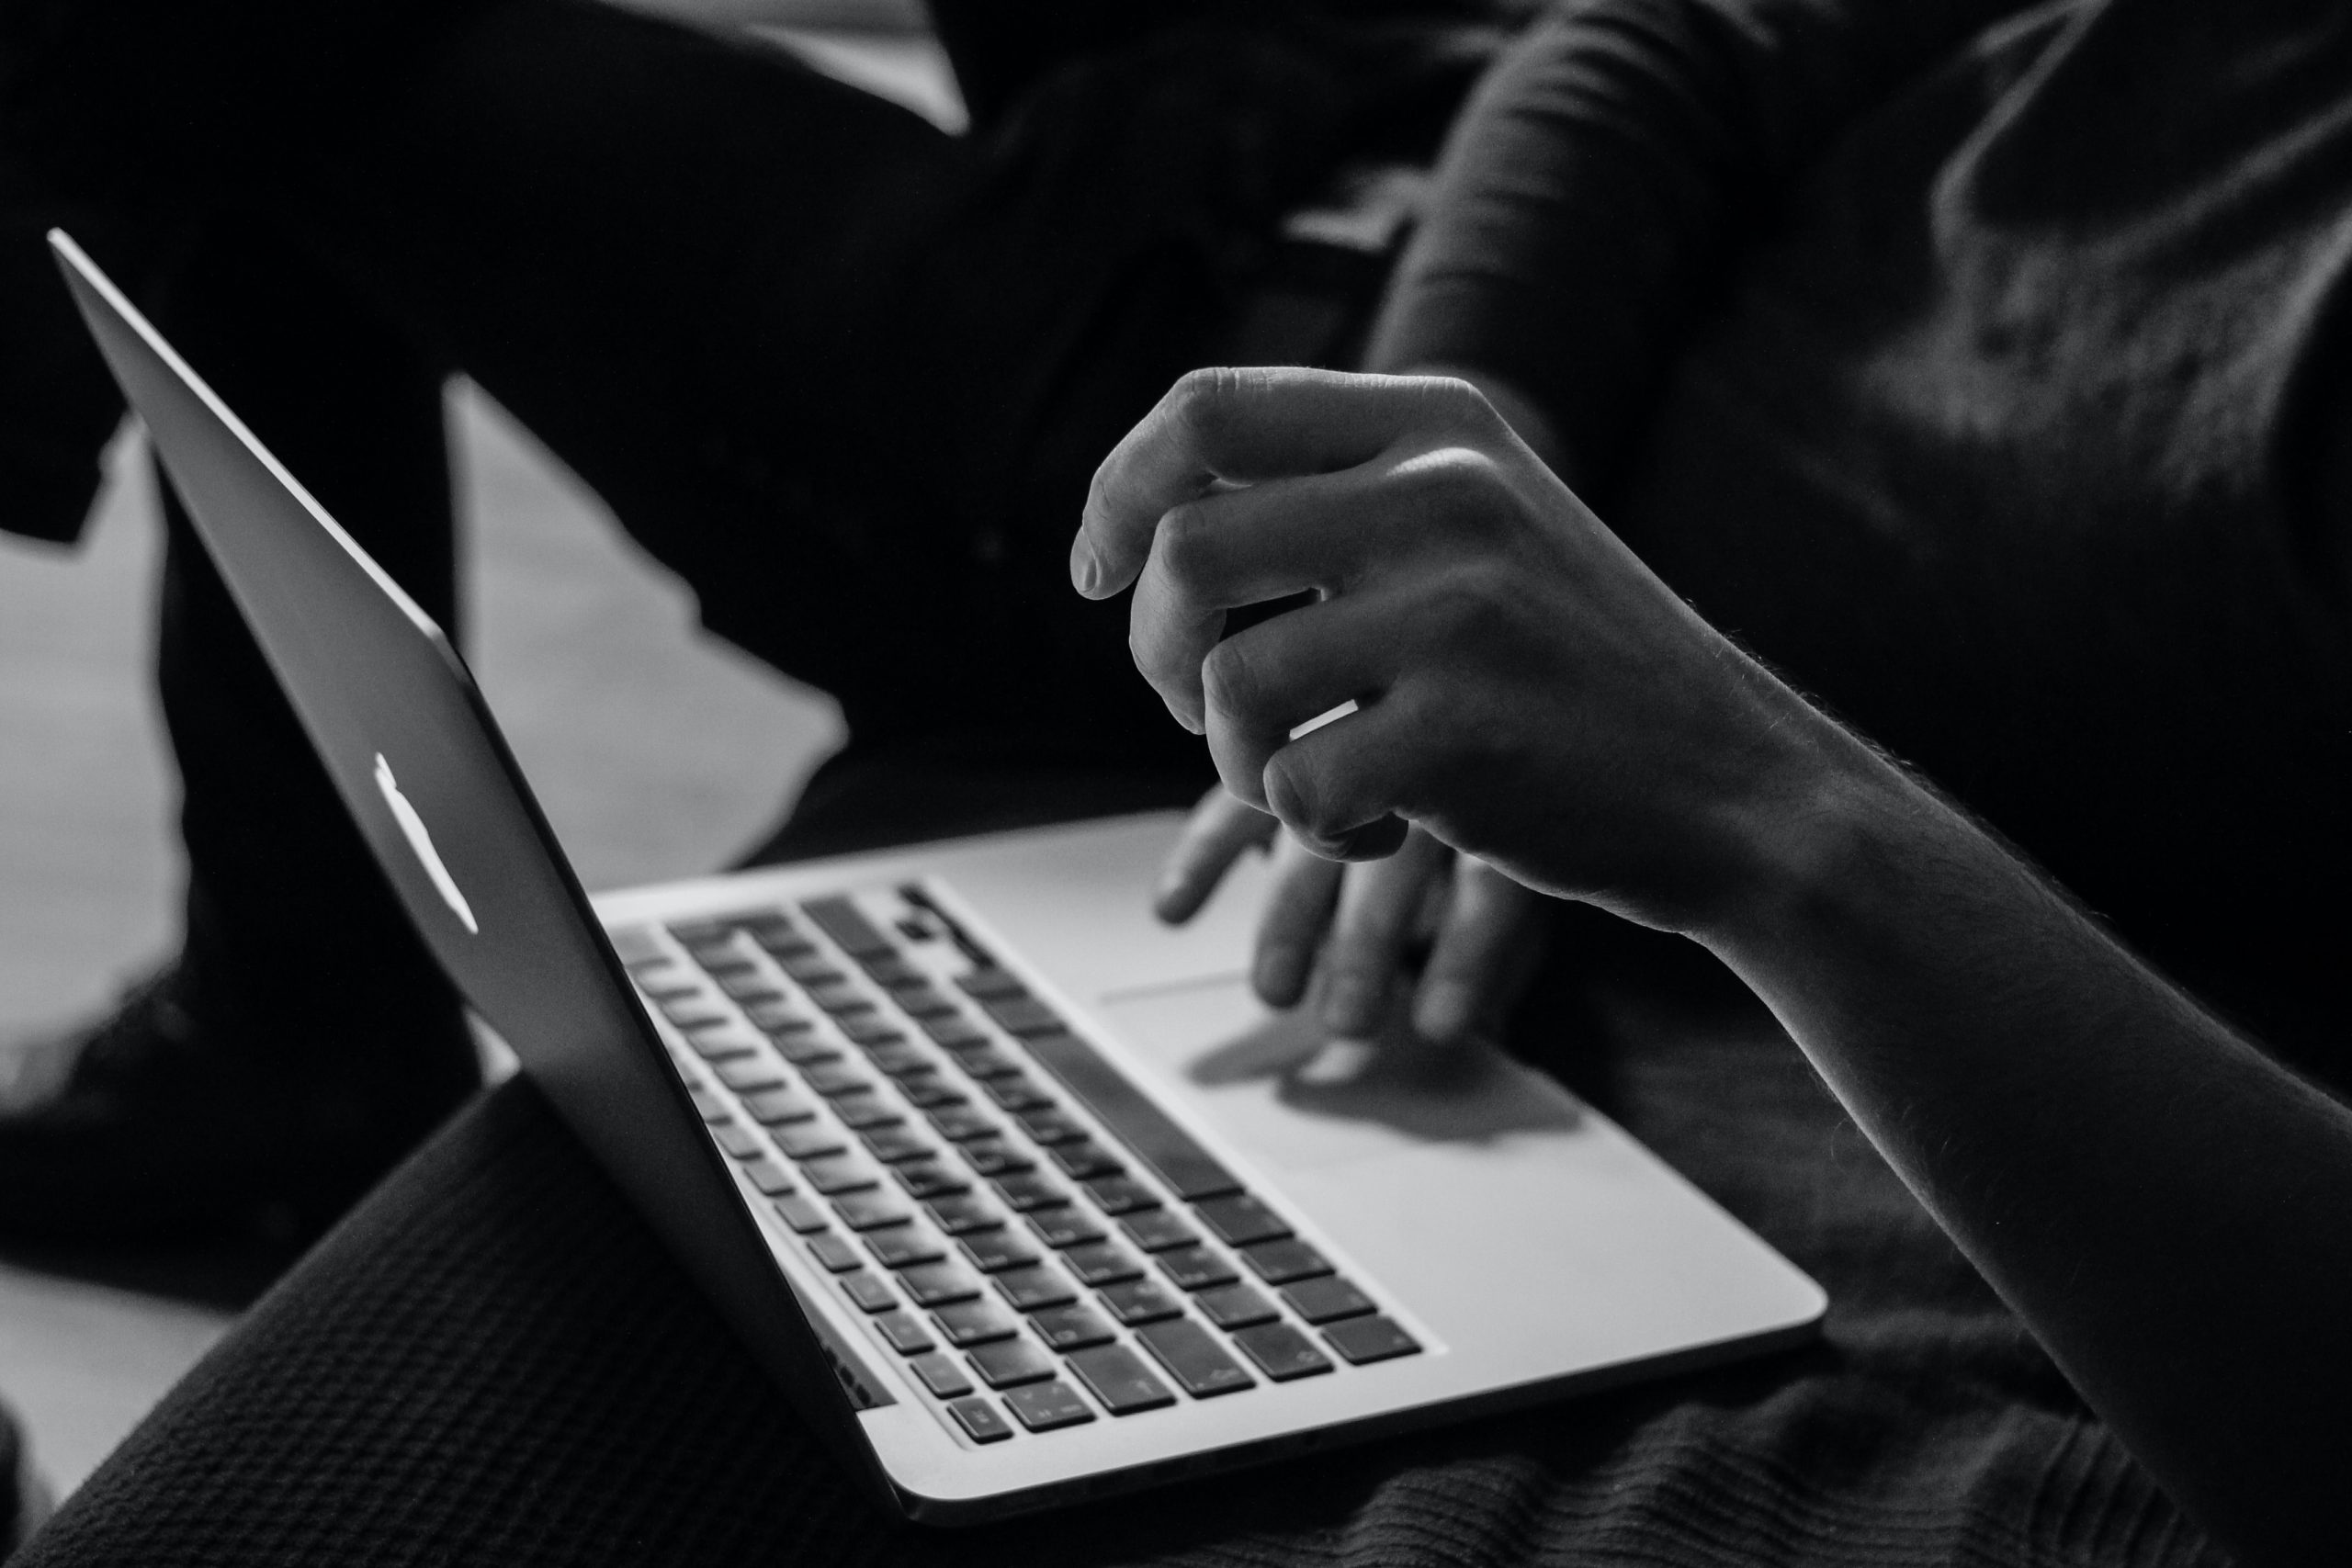 Black and white photo of hands using a laptop trackpad